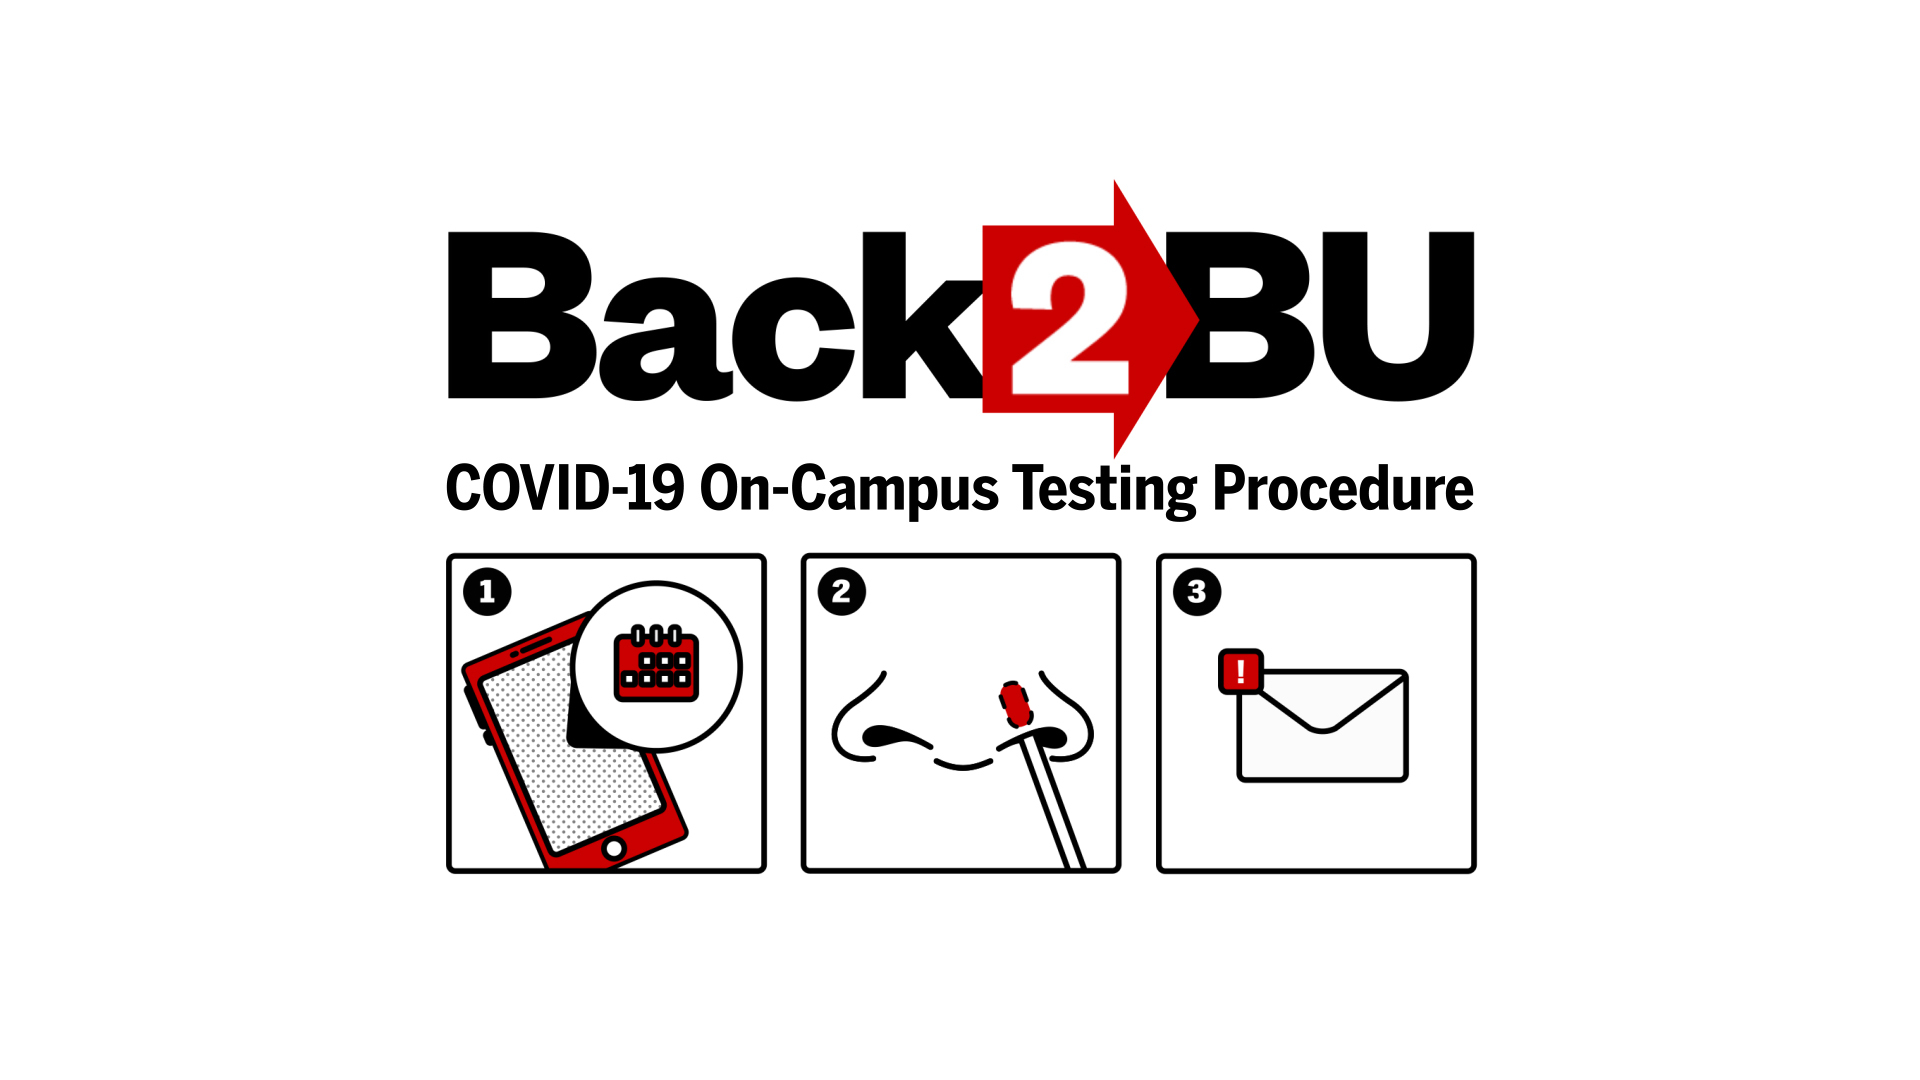 Video thumbnail for a Back 2 BU video. In illustration, shows “Back 2 BU” logo and reads “COVID-19 On-Campus Testing Procedure.” Below is a series of panels with a mobile phone and a calendar icon in a box labelled 1, in box 2, a picture of a nose being swabbed, and box 3 shows a letter, email notification with an alert.